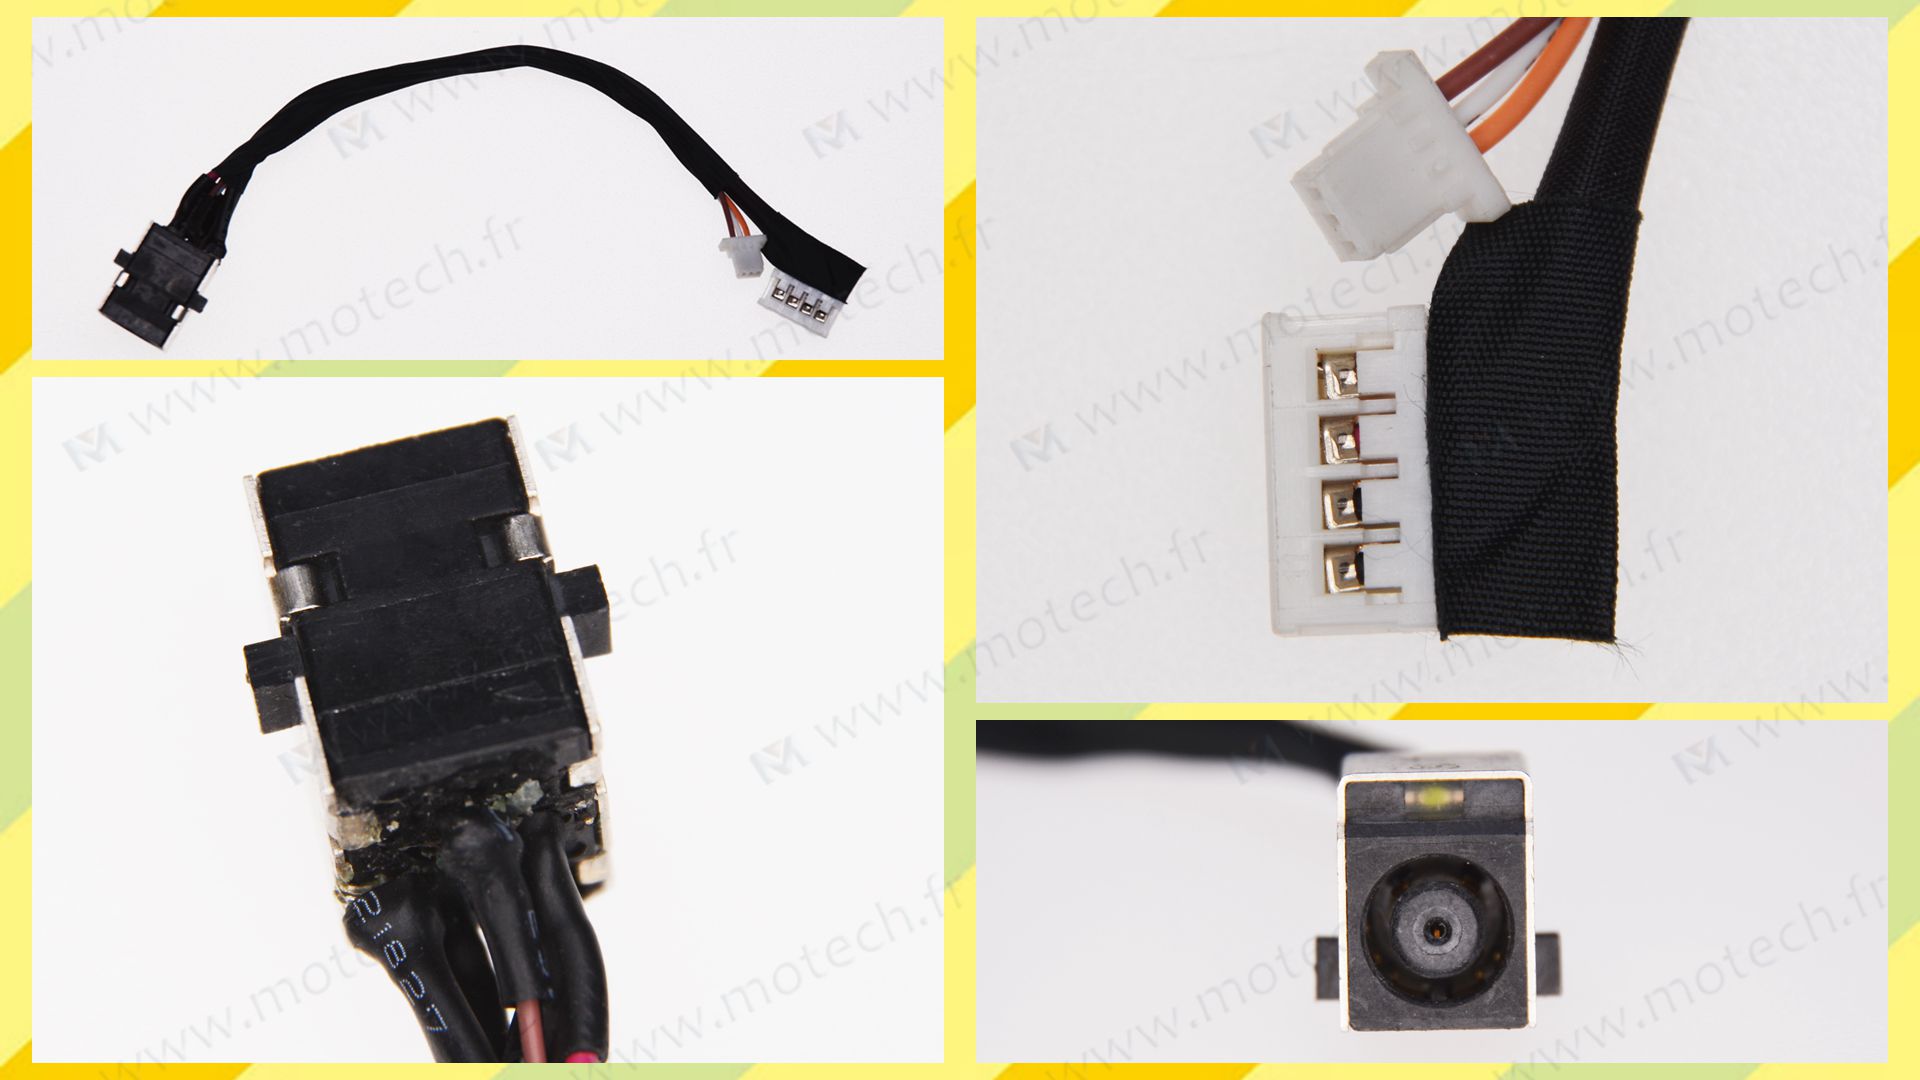 HP 4530 charging connector, HP 4530 DC Power Jack, HP 4530 DC IN Cable, HP 4530 Power Jack, HP 4530 plug, HP 4530 Jack socket, HP 4530 connecteur de charge, 